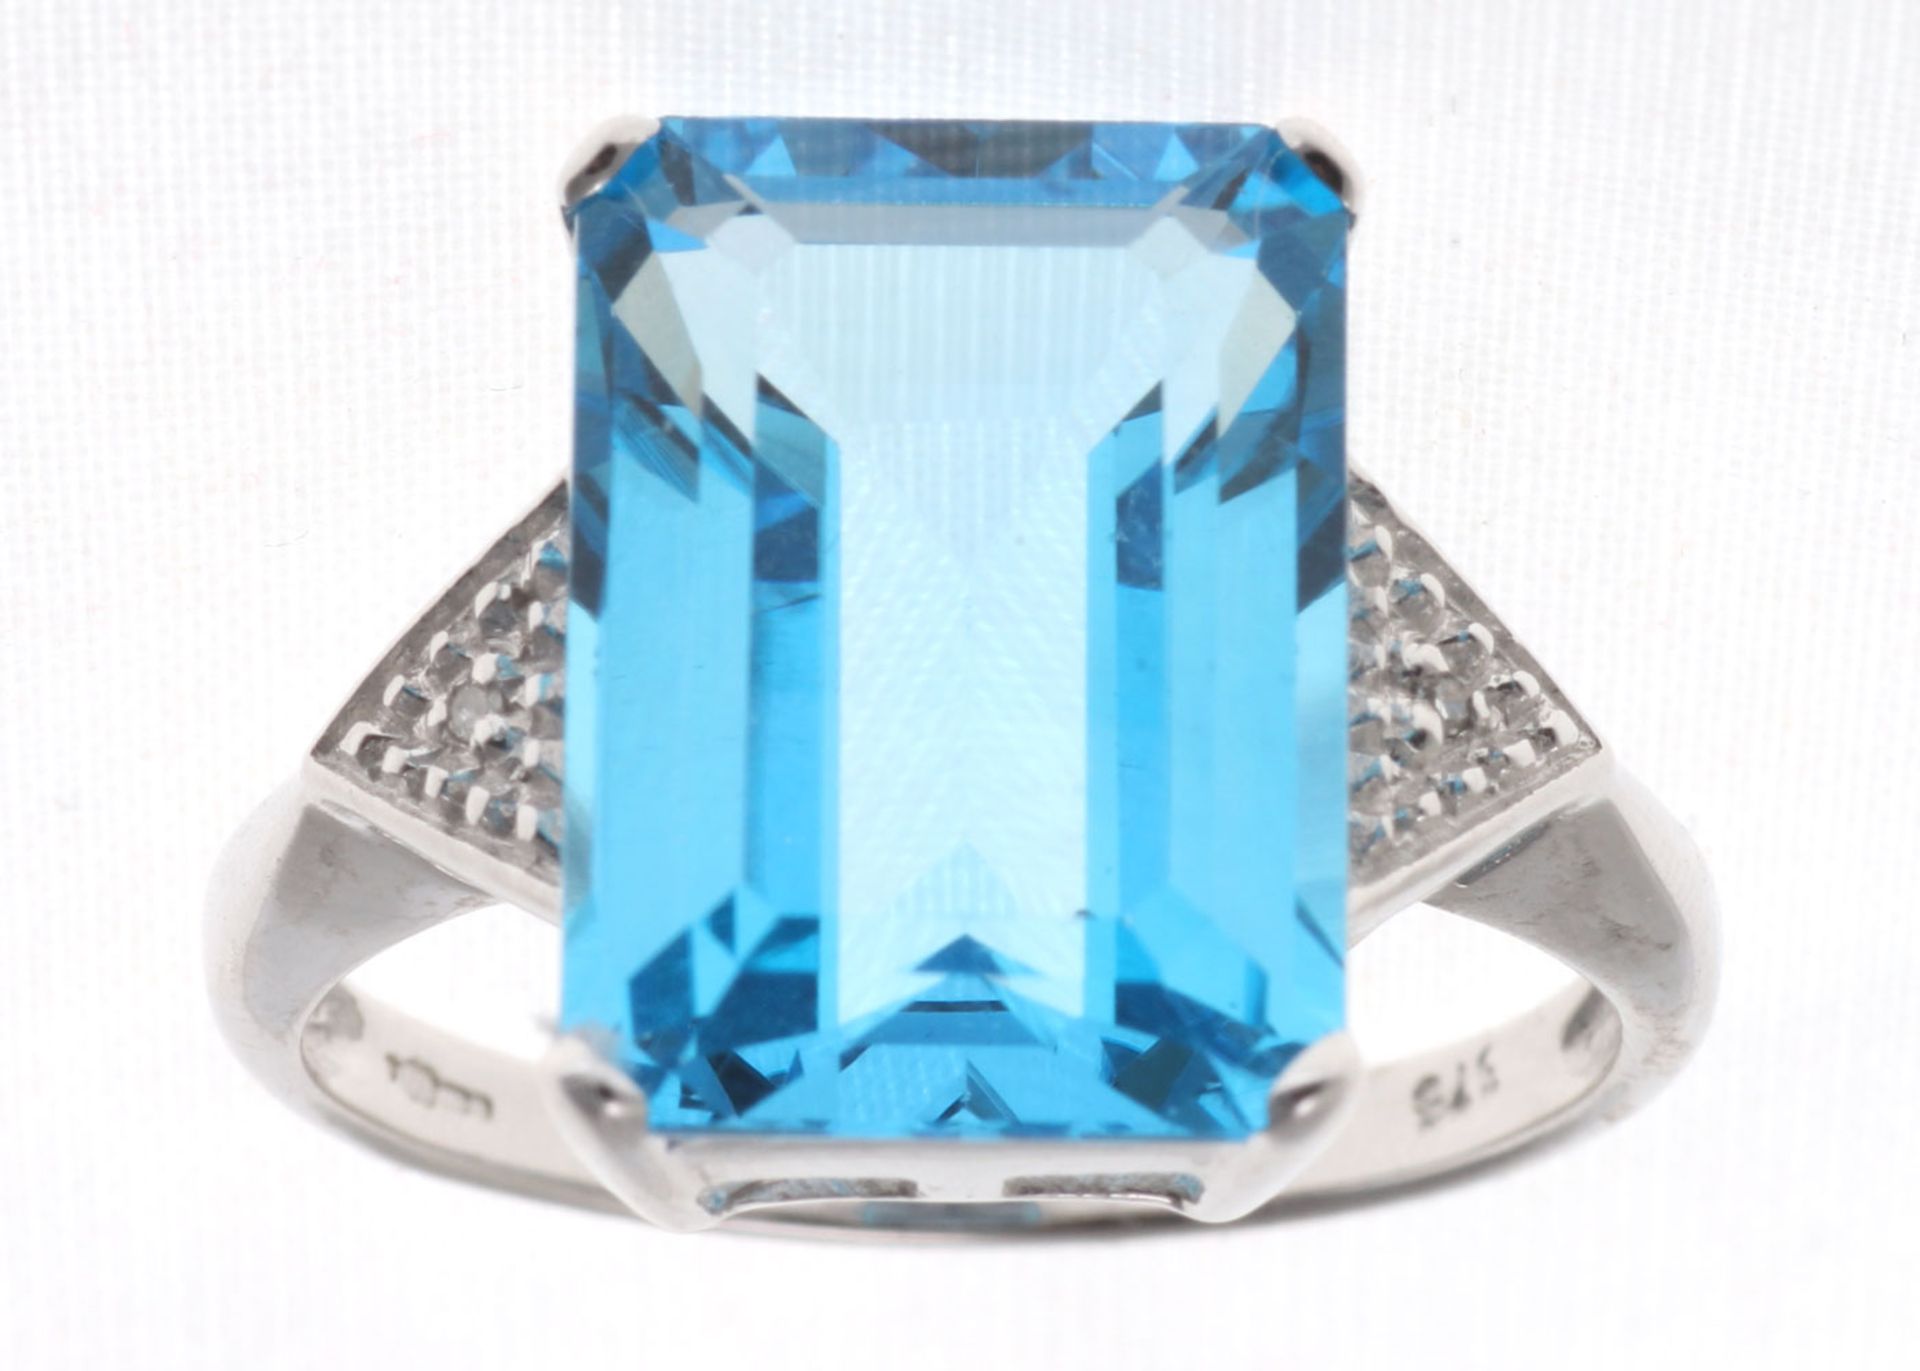 9ct White Gold Diamond And Blue Topaz Ring 0.01 Carats - Valued by GIE £1,620.00 - This stunning - Image 6 of 7